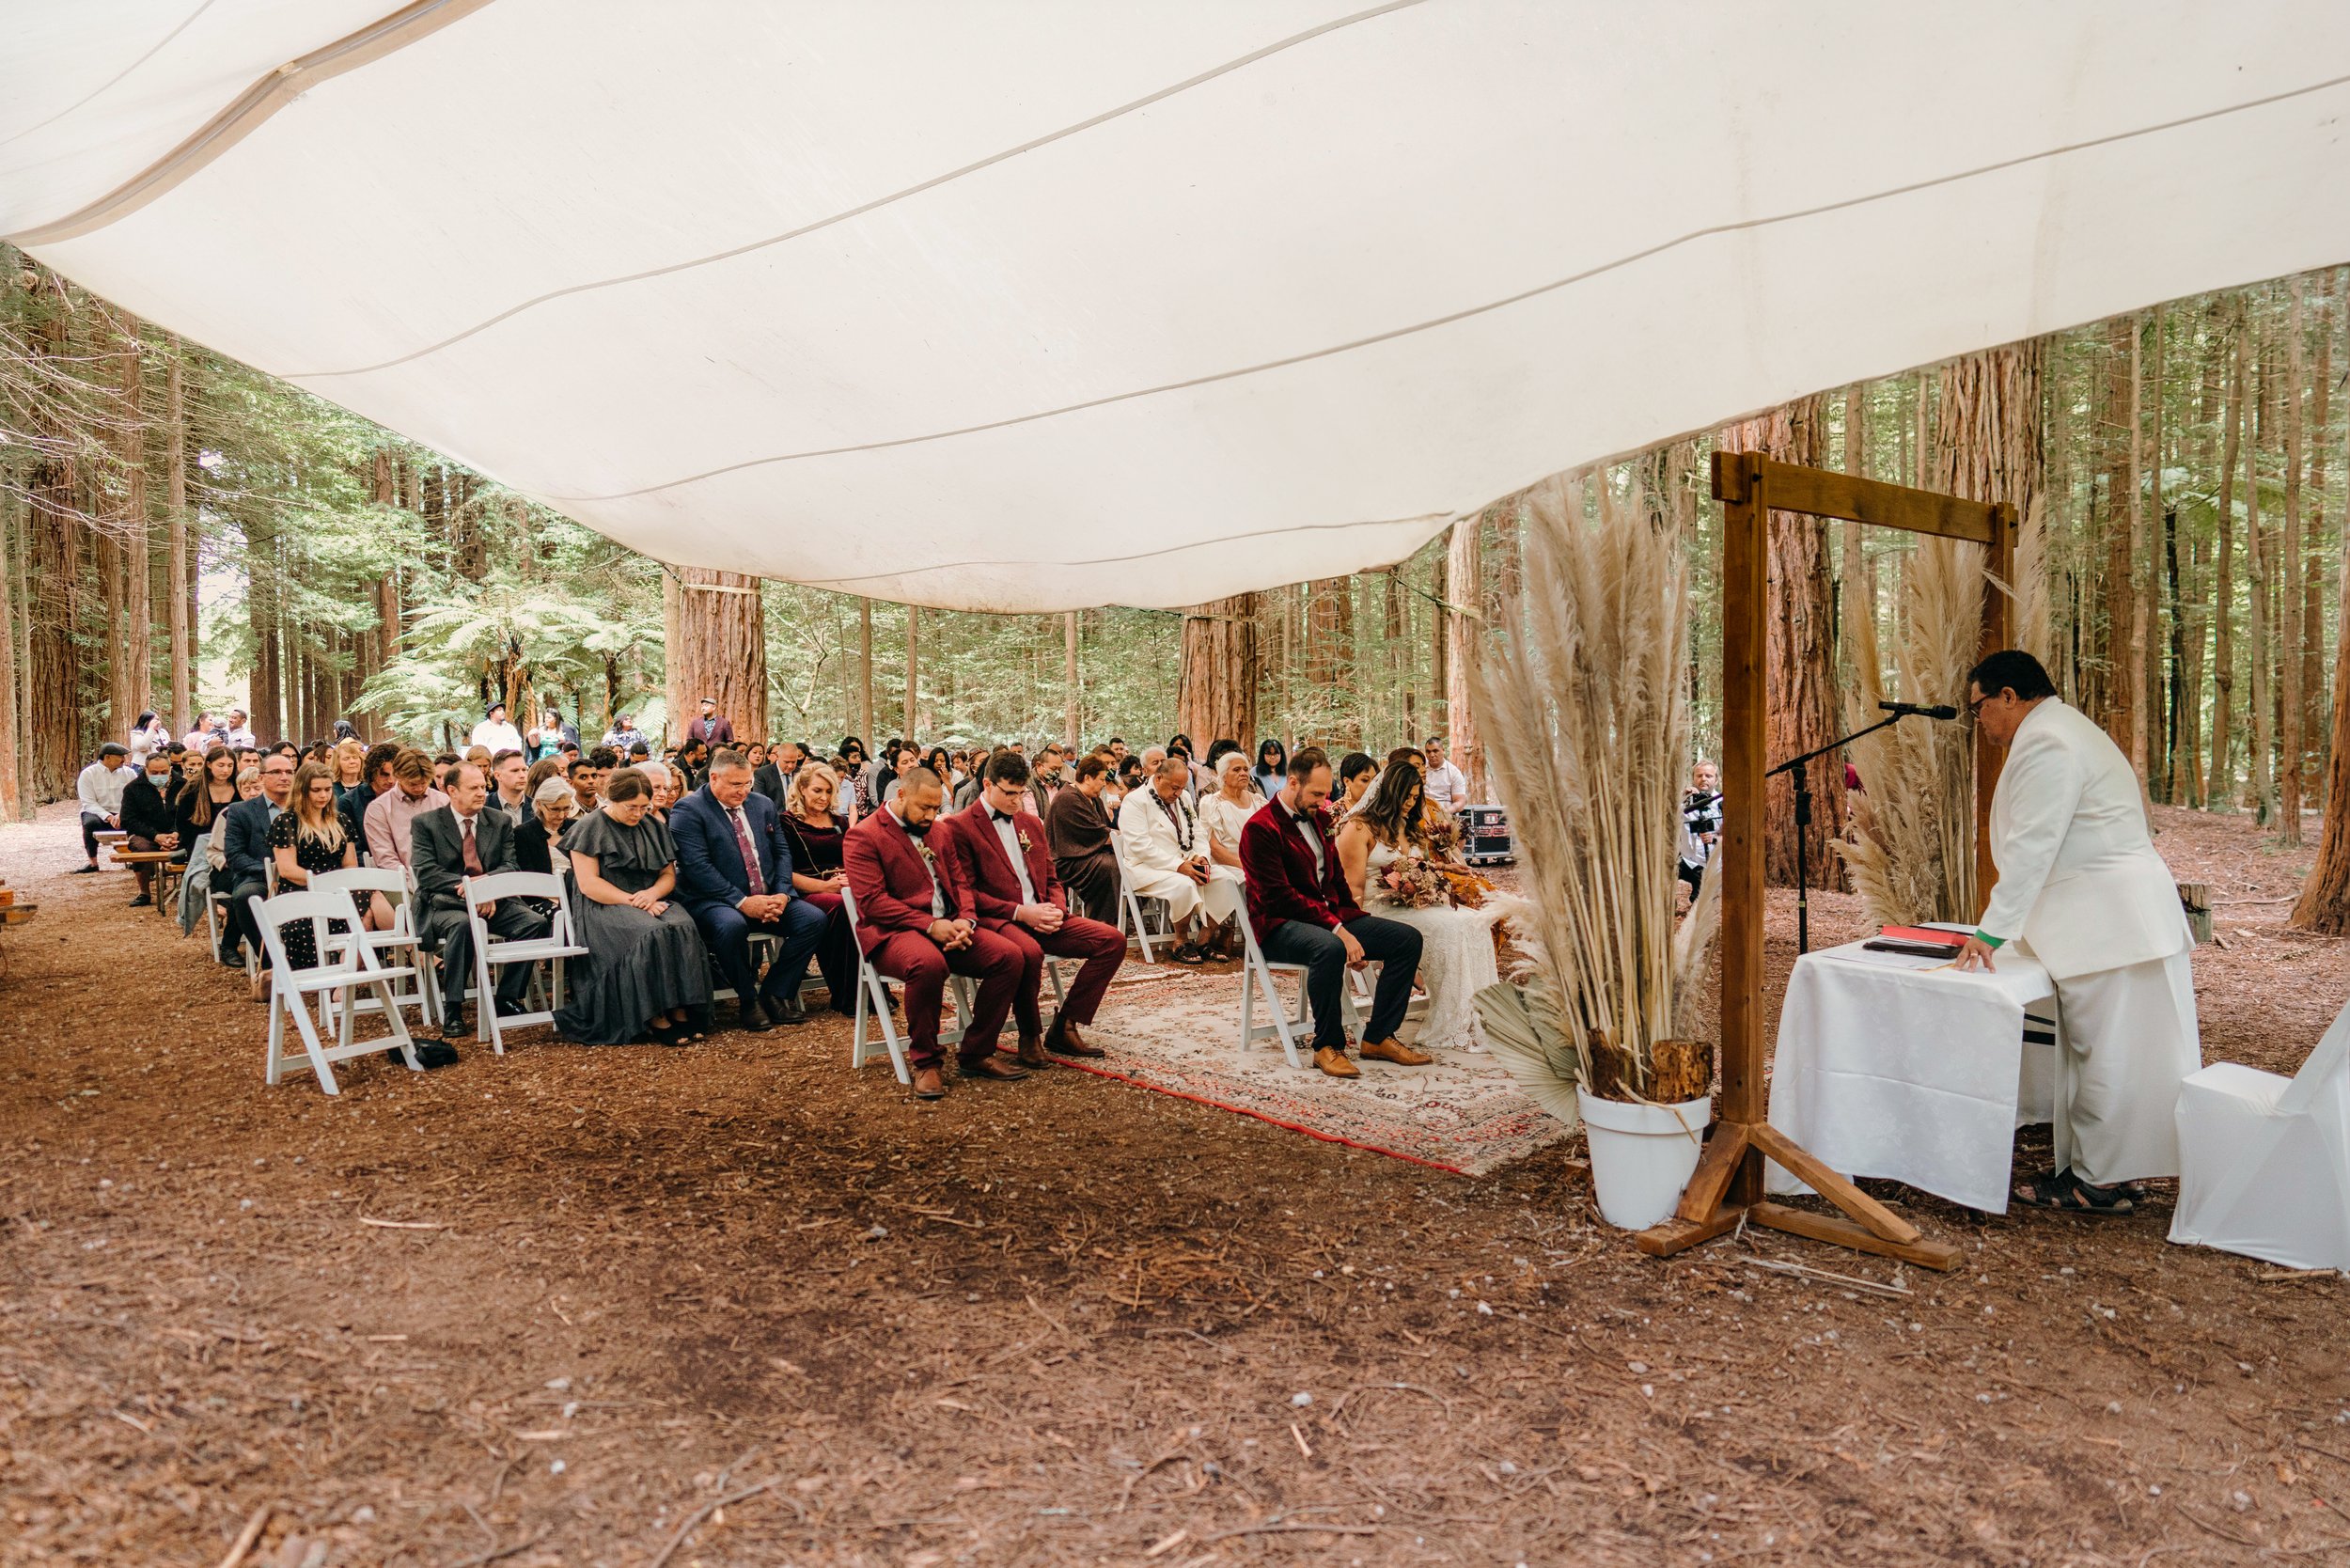  Wedding Ceremony under the Sails in The Redwoods in Rotorua 